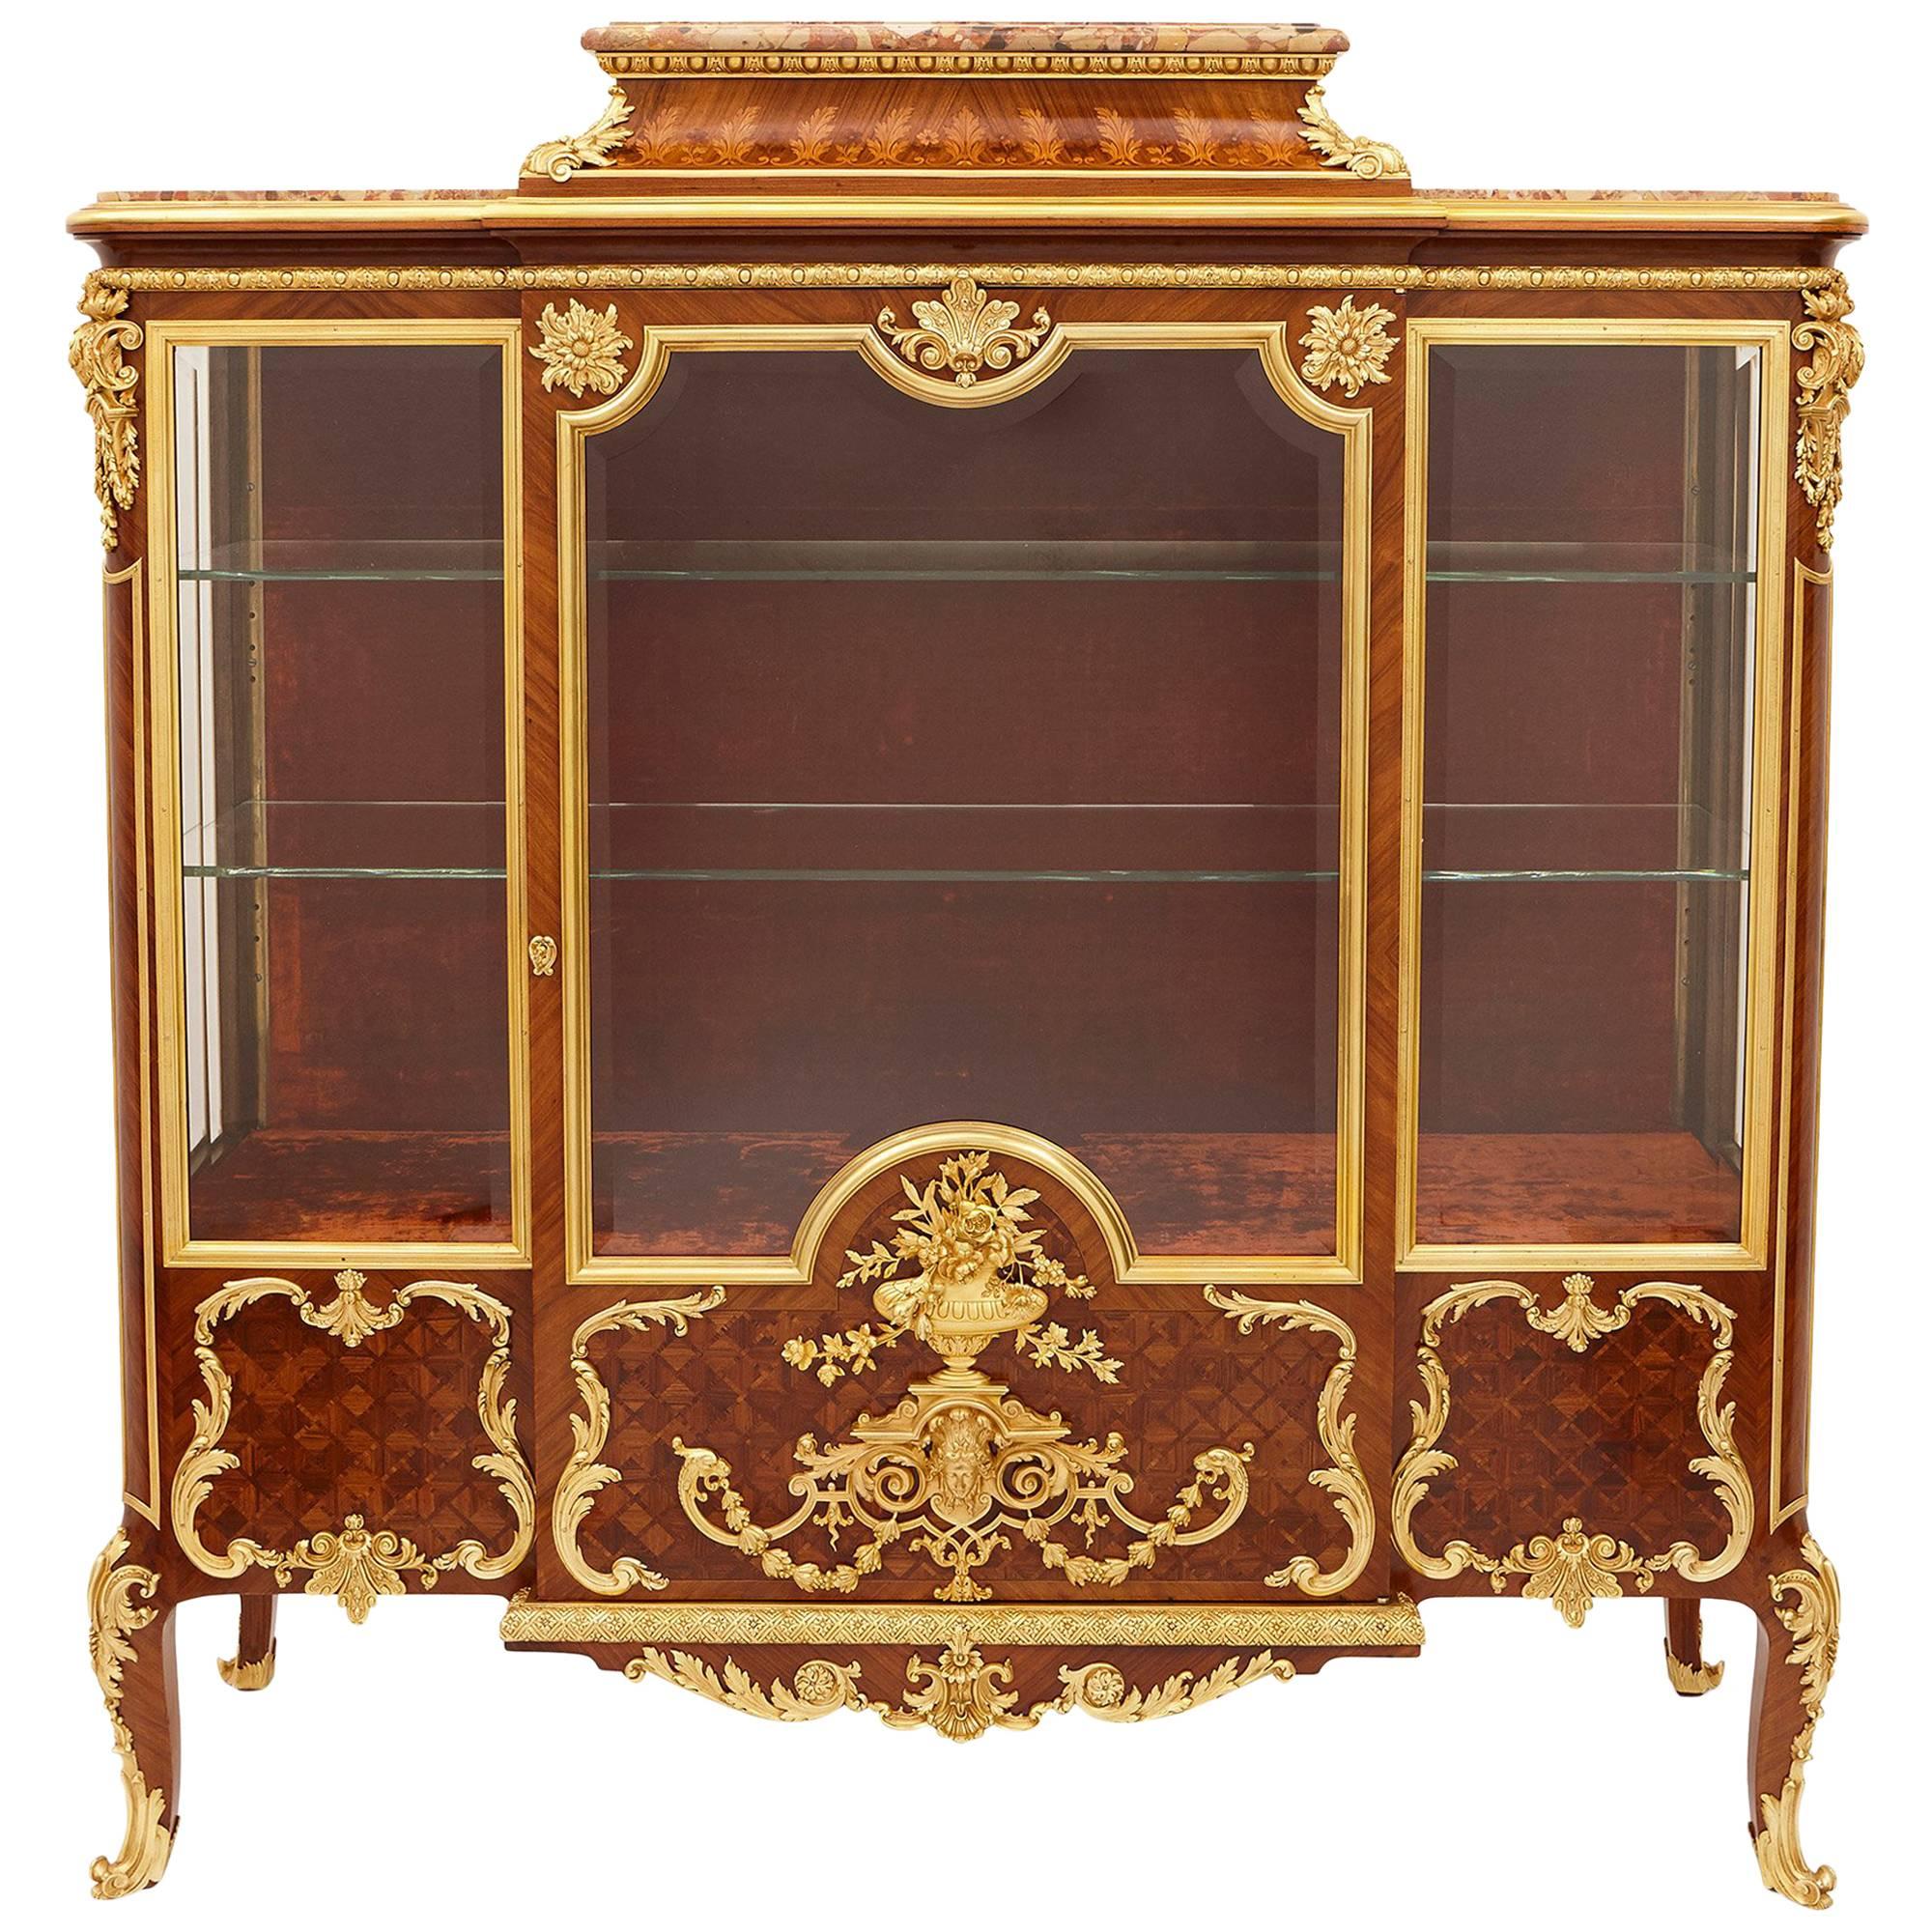 French Ormolu-Mounted Mahogany, Kingwood, Marquetry and Parquetry Vitrine